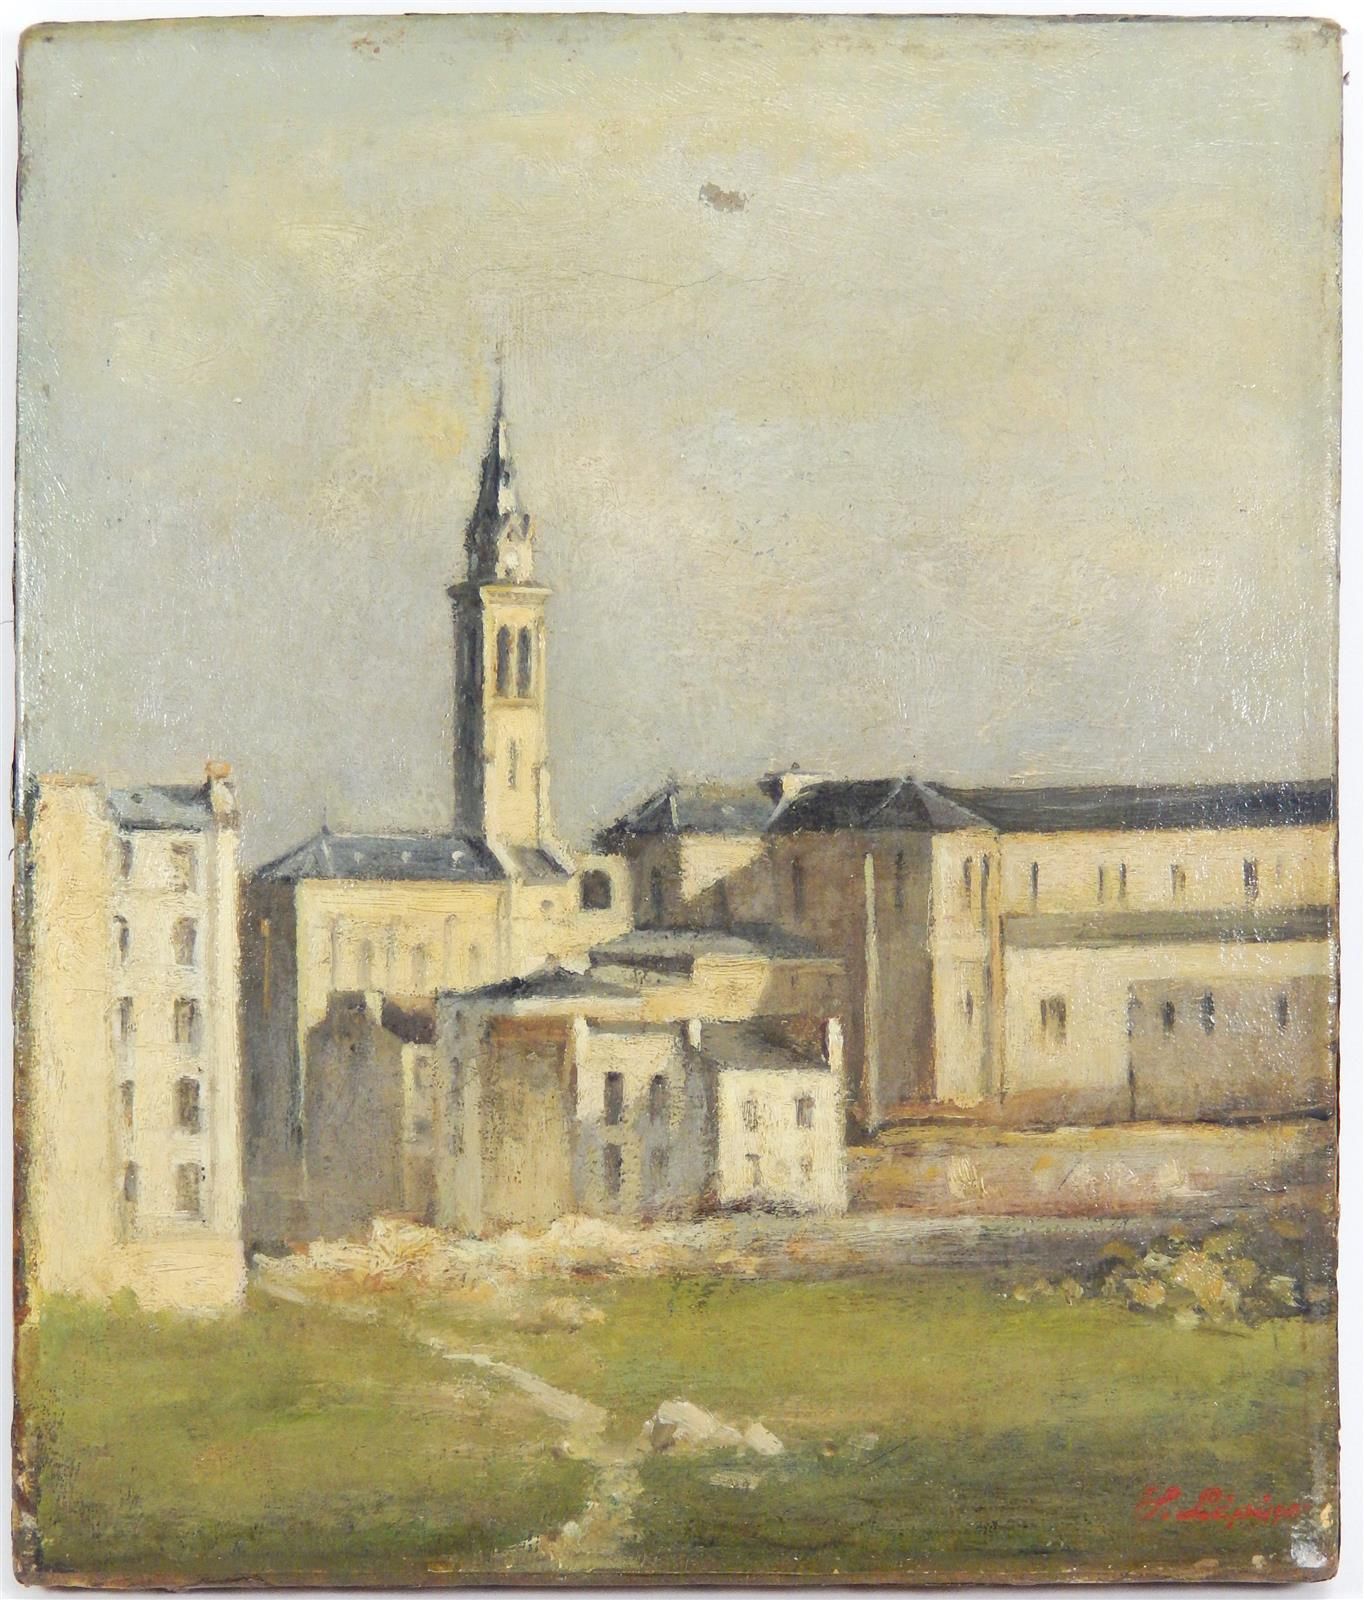 Null French school of the 19th century.

Surroundings of Caen.

Oil on paper mou&hellip;